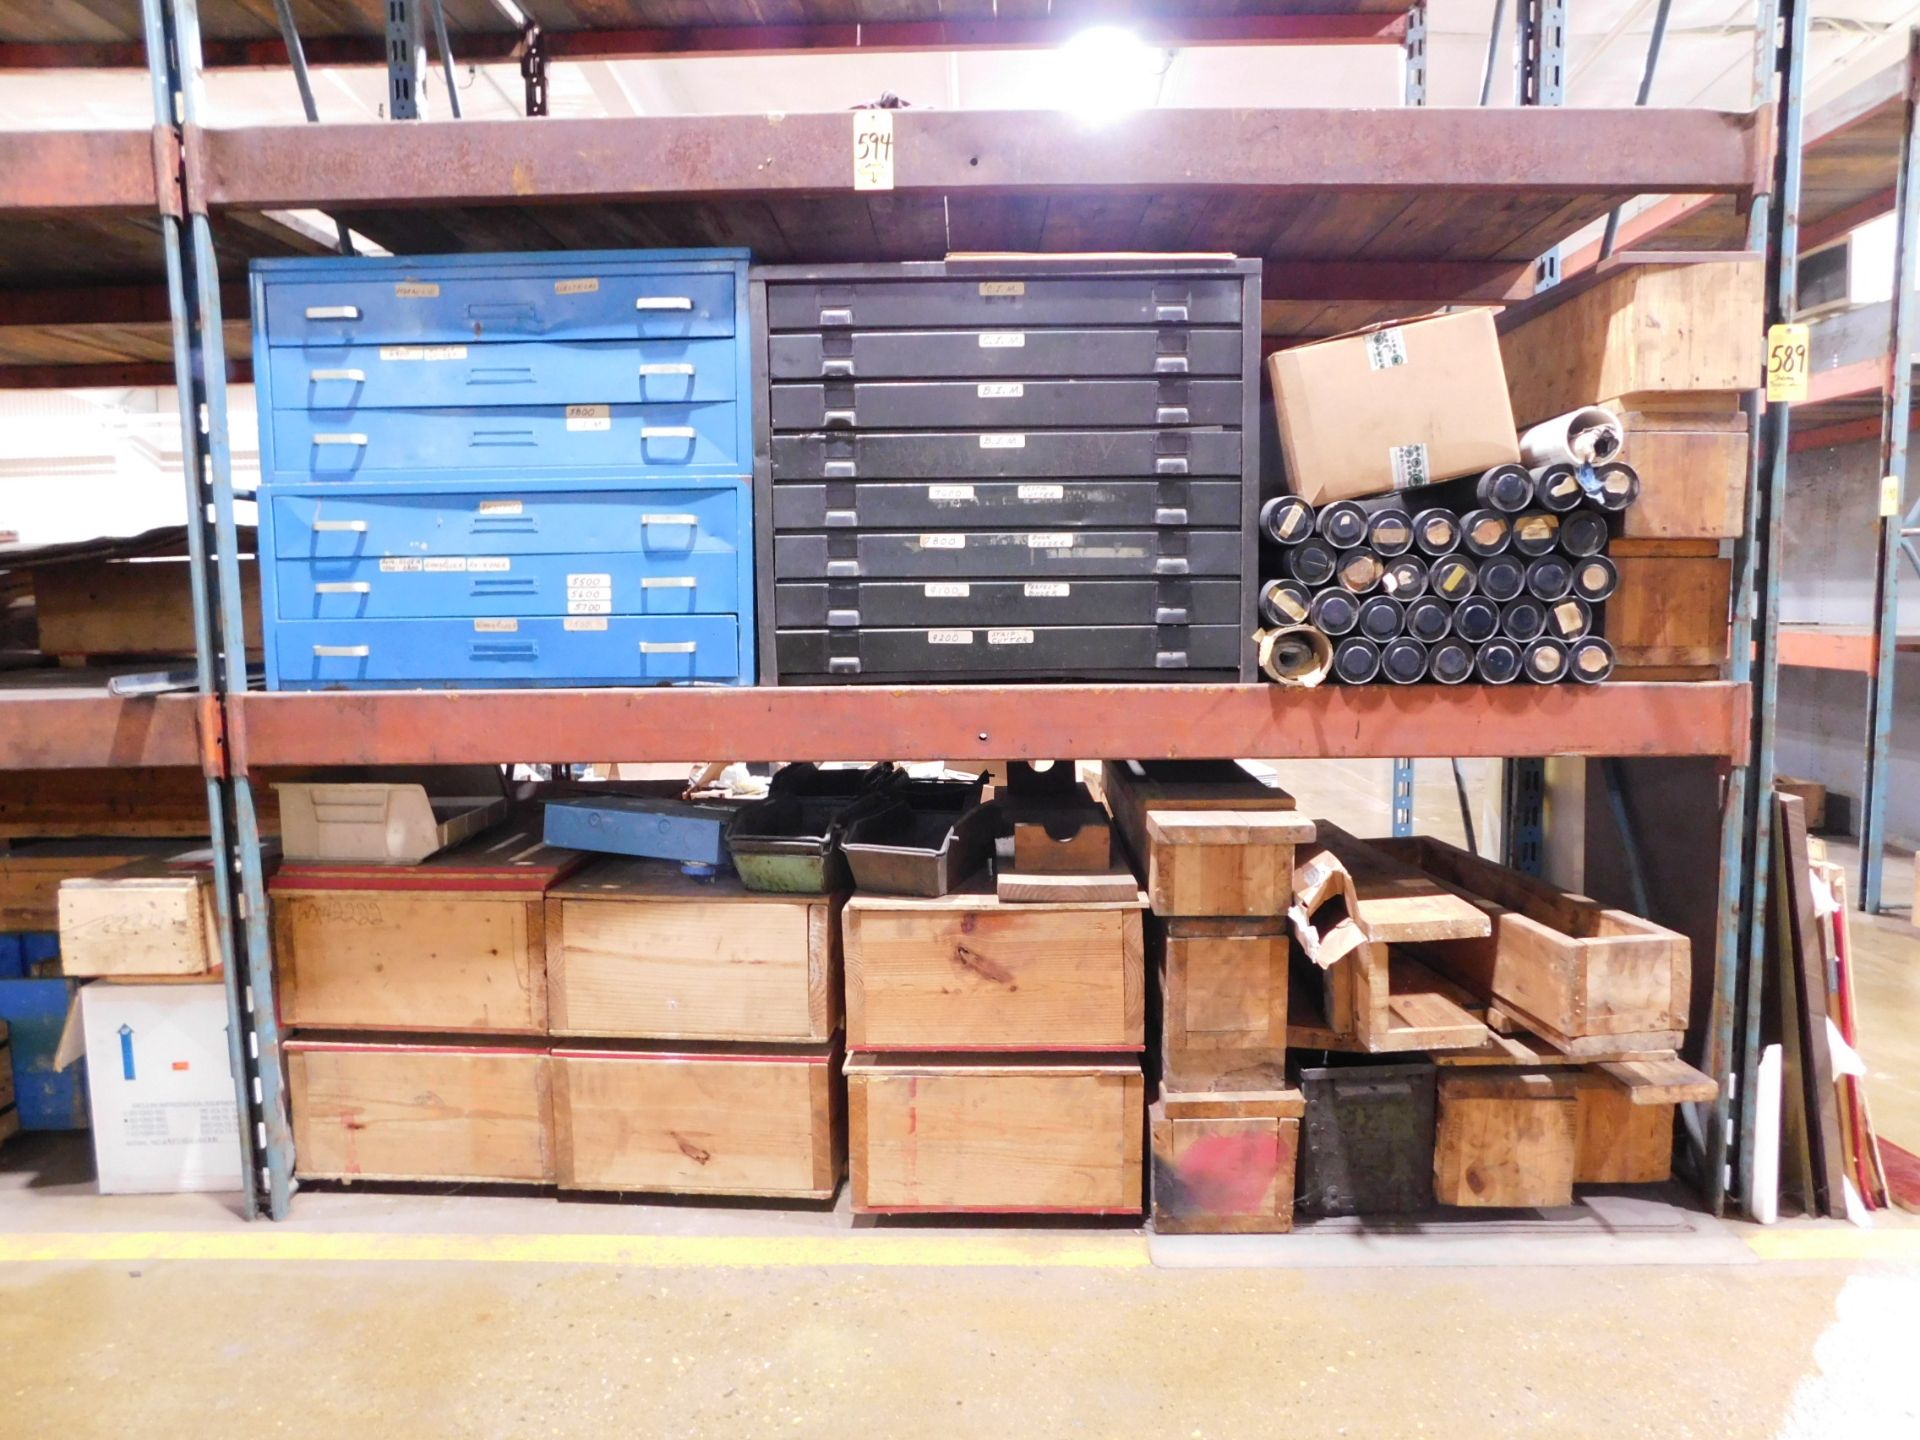 Contents of Pallet Shelving